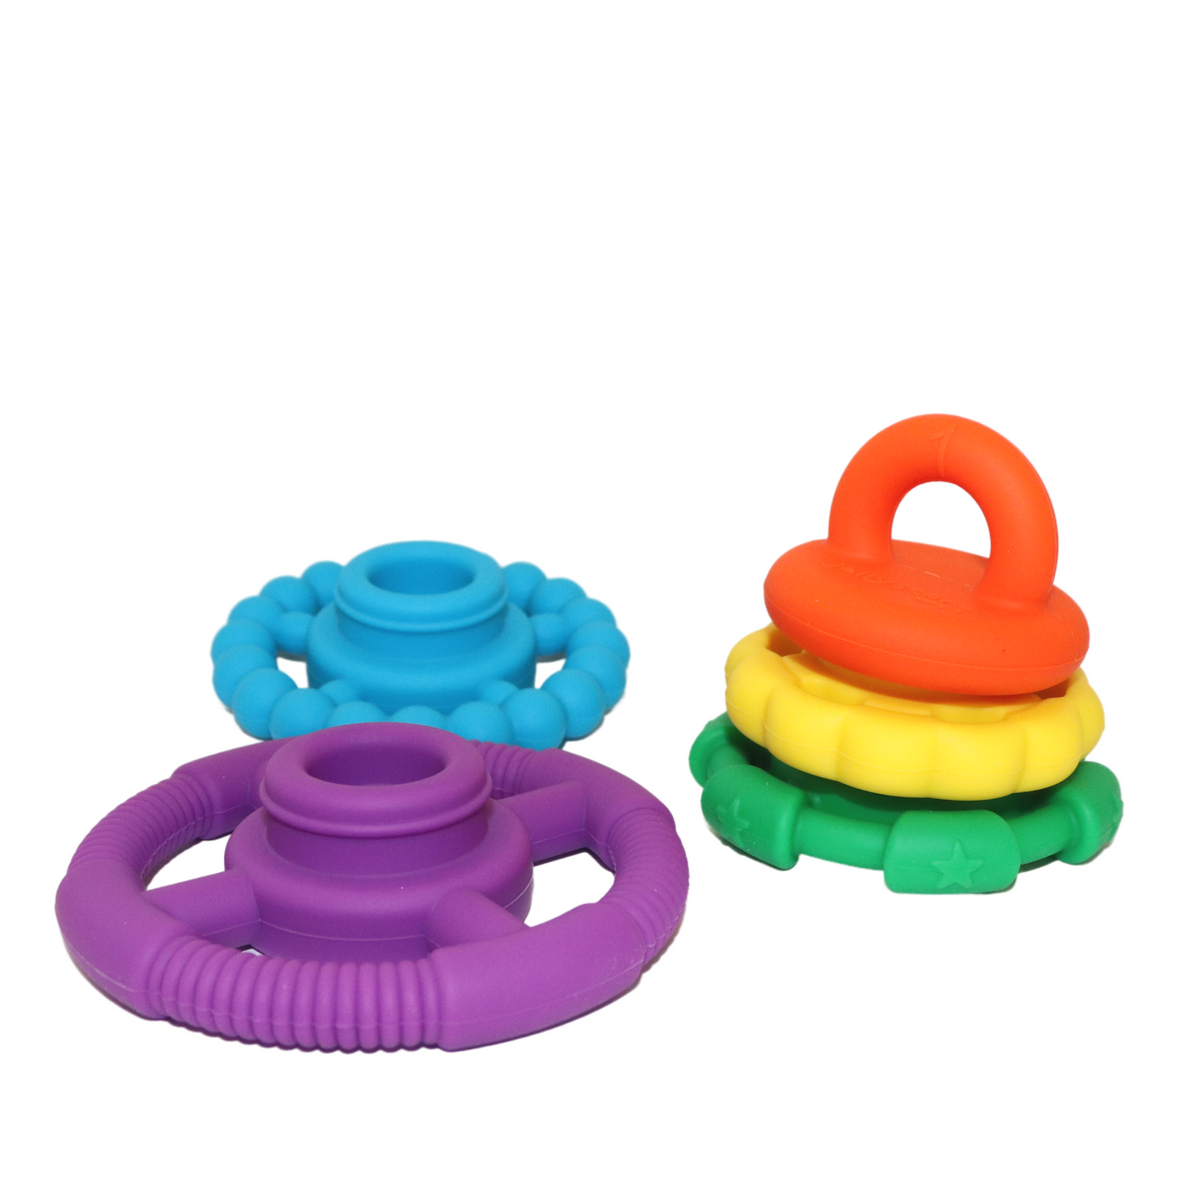 Rainbow Stacker and Teether Toy by Jellystone Designs